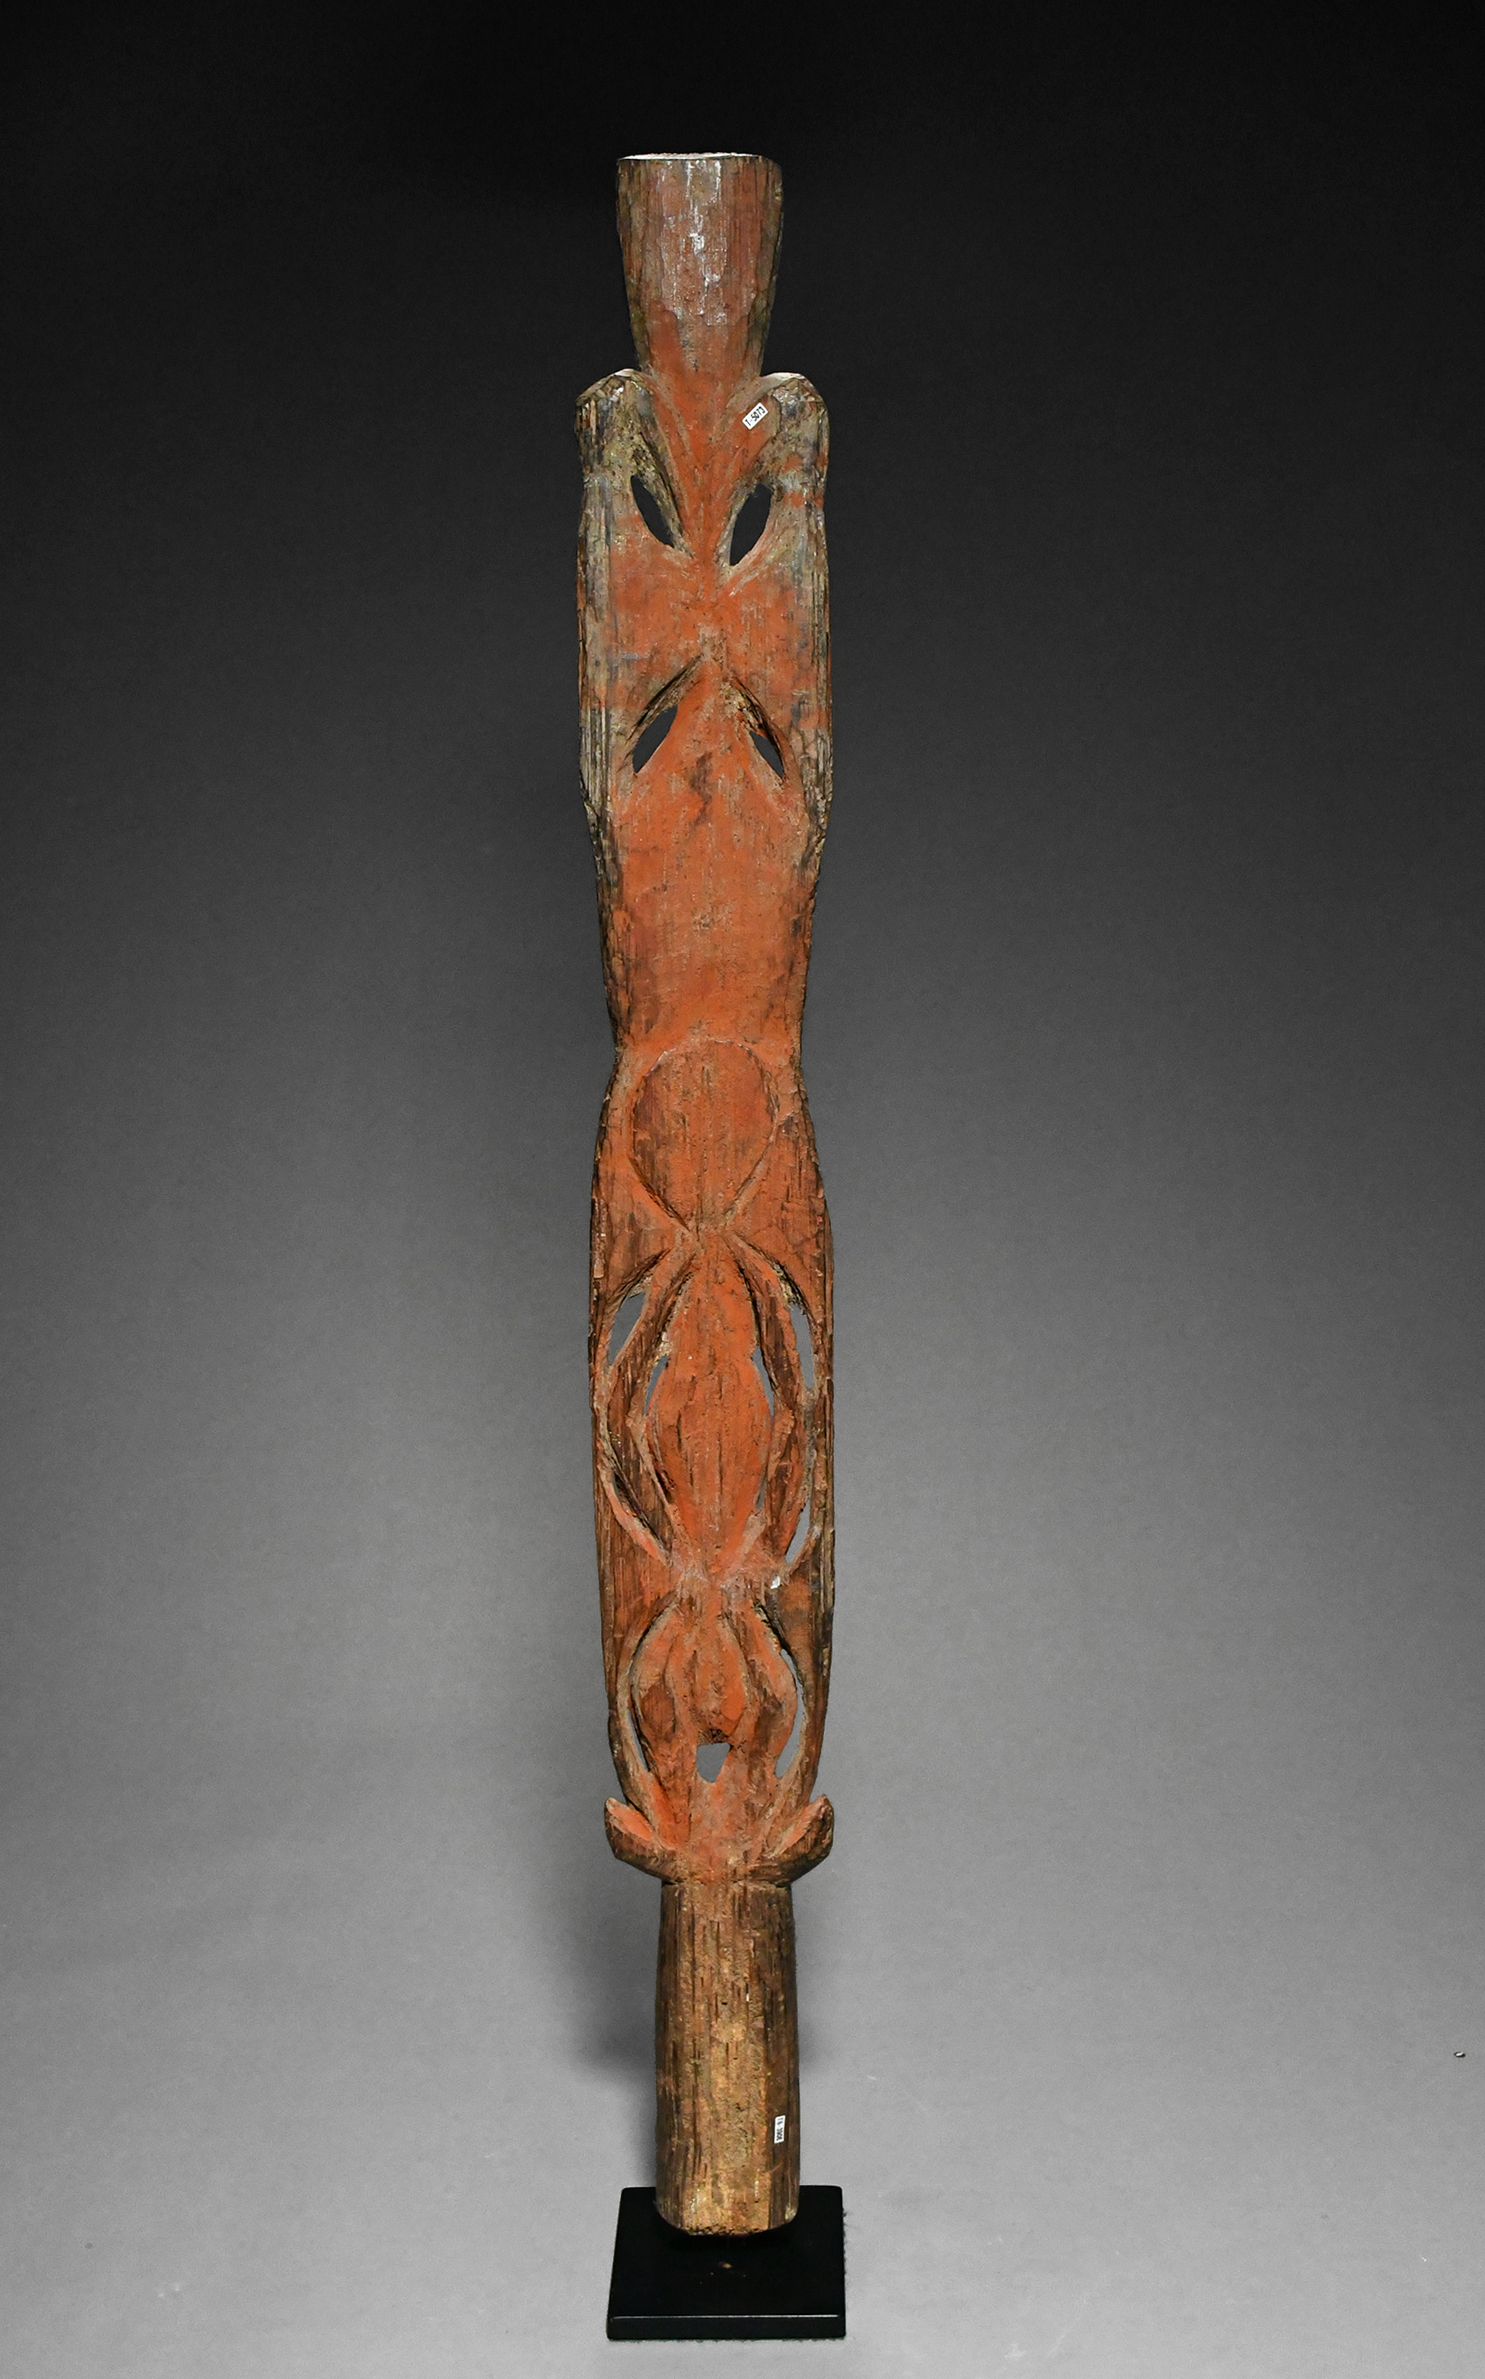 A Fine Old Yam Digging Implement Finial Abelam People East Sepik Province Papua New Guinea